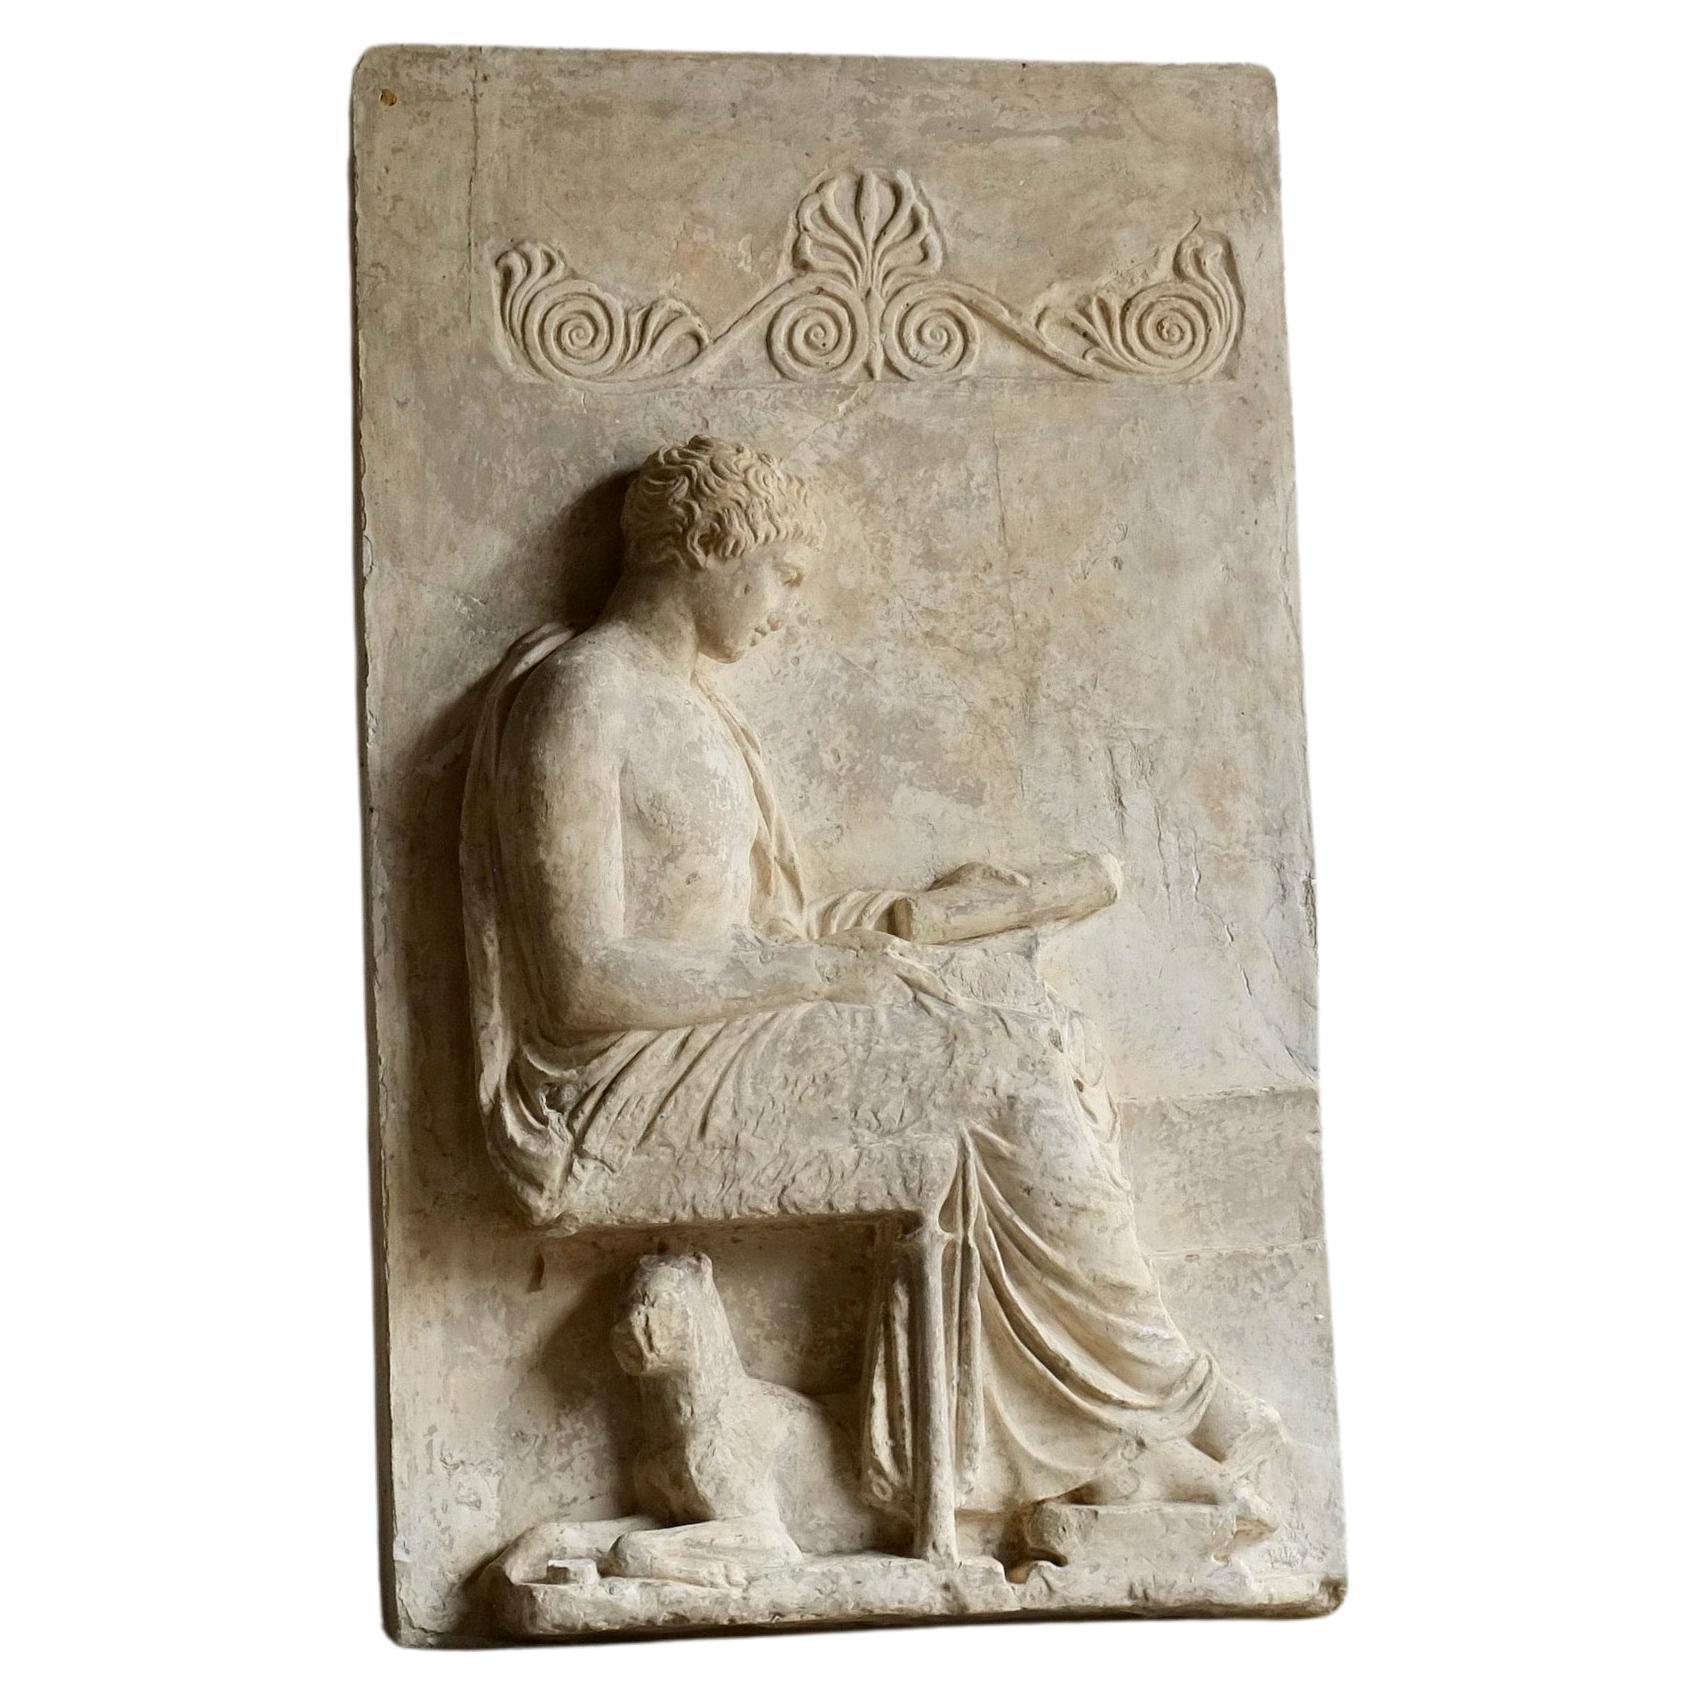 19th-Century Plaster Casting From The Grottaferrata Marble Grave Stele